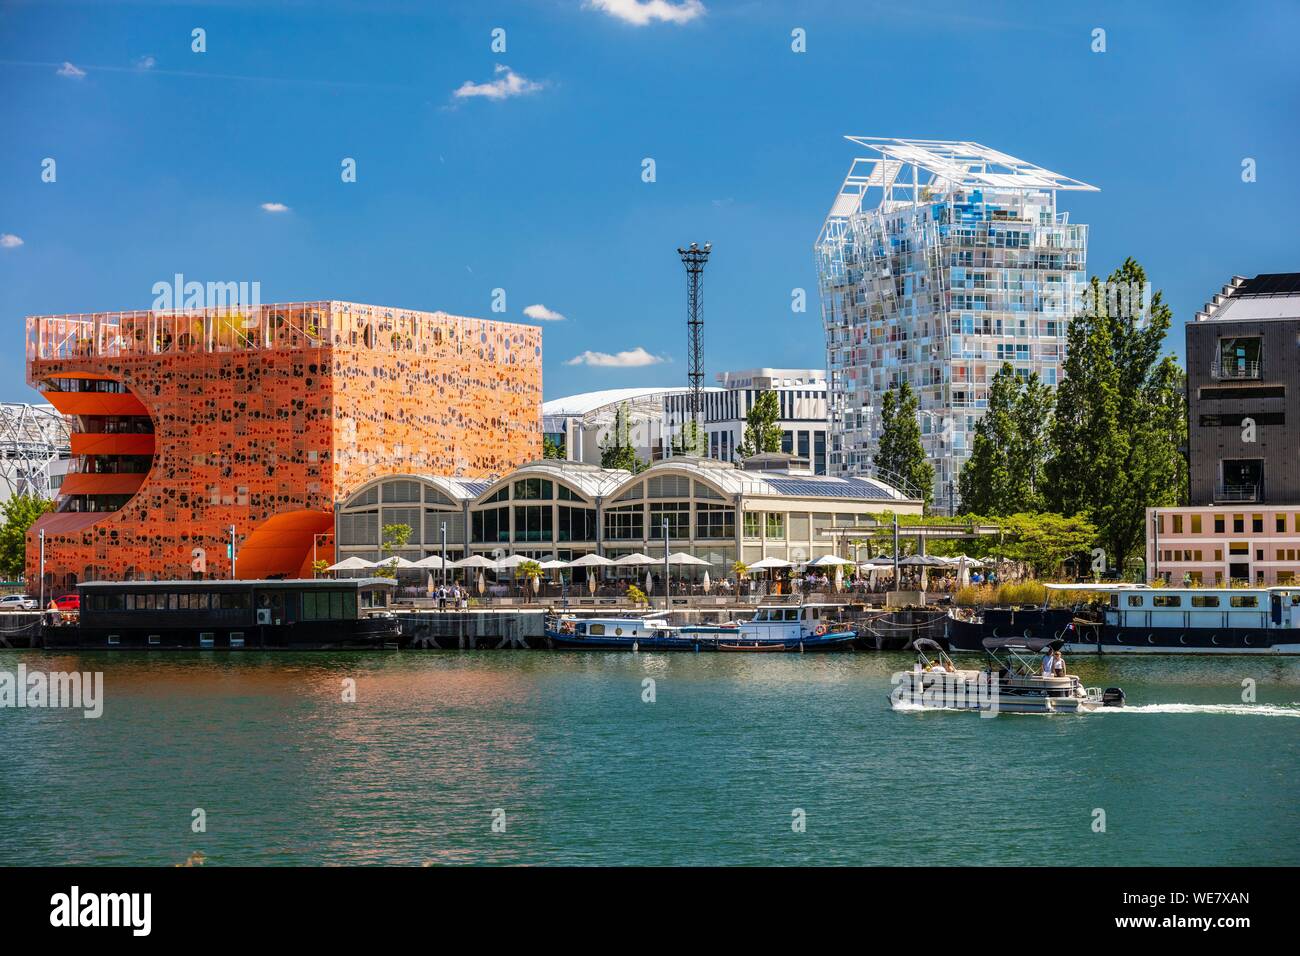 France, Rhone, Lyon, La Confluence district south of the Presqu'ile, close to the confluence of the Rhone and the Saone rivers, quai Rambaud along the former docks, Pavillon des Salins also called Cube Orange by the architects Dominique Jakob and Brendan Mac Farlane and Ycone residential building designed by architect Jean Nouvel Stock Photo